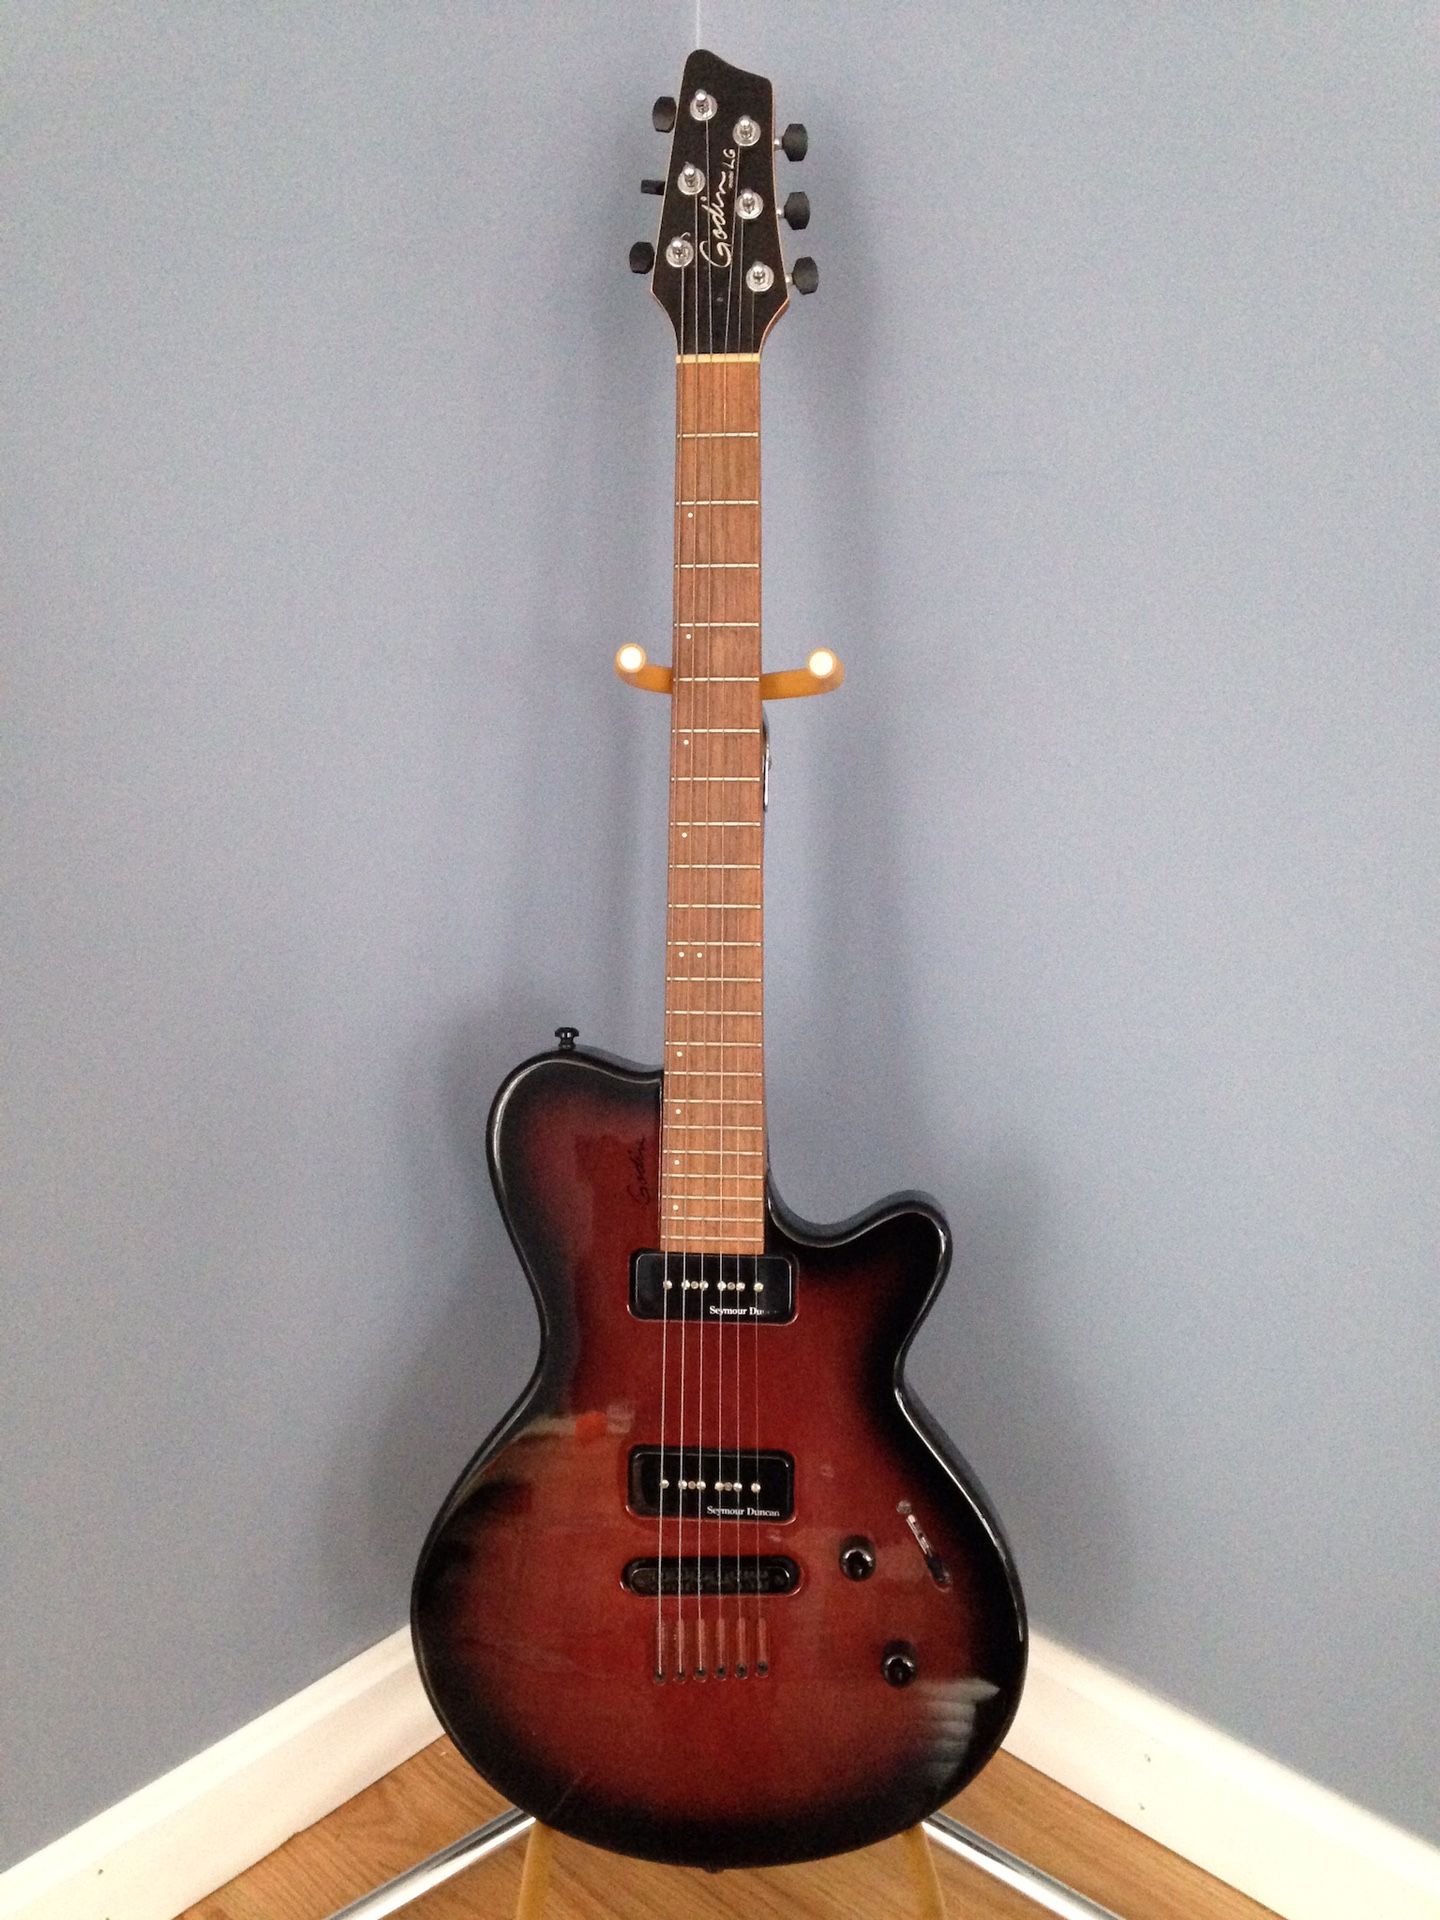 Godin LG guitar (top of the line model w/mahogany body & neck and Seymour Duncan P90 humbuckers. Made in Canada)